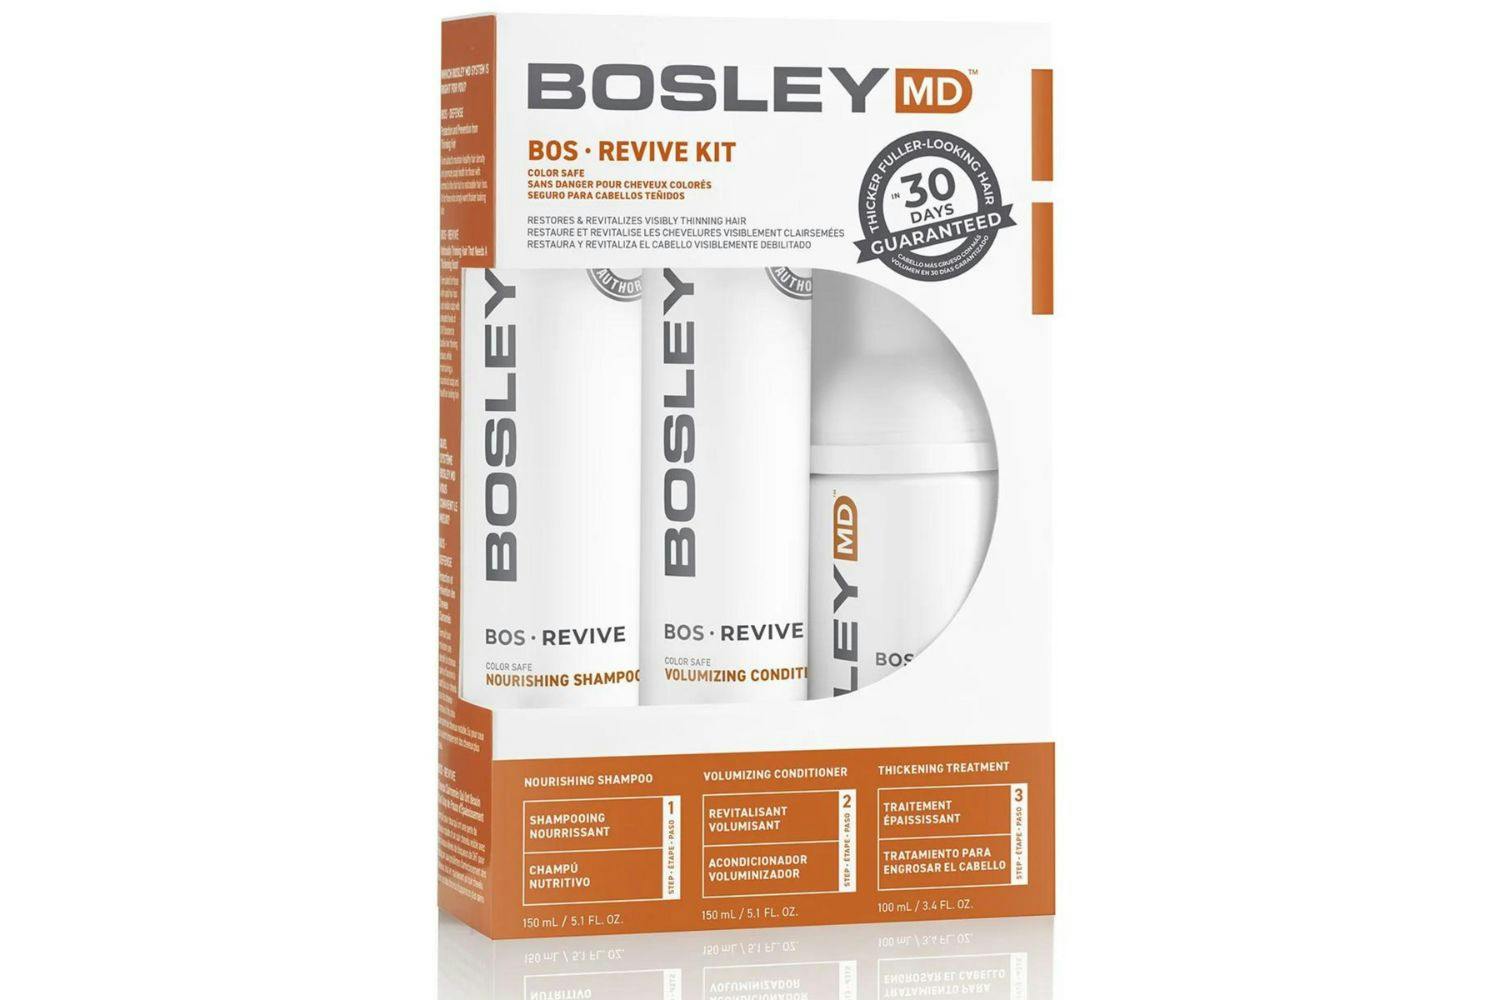 Bosley BosRevive Non Color-Treated Hair 30 Day Kit